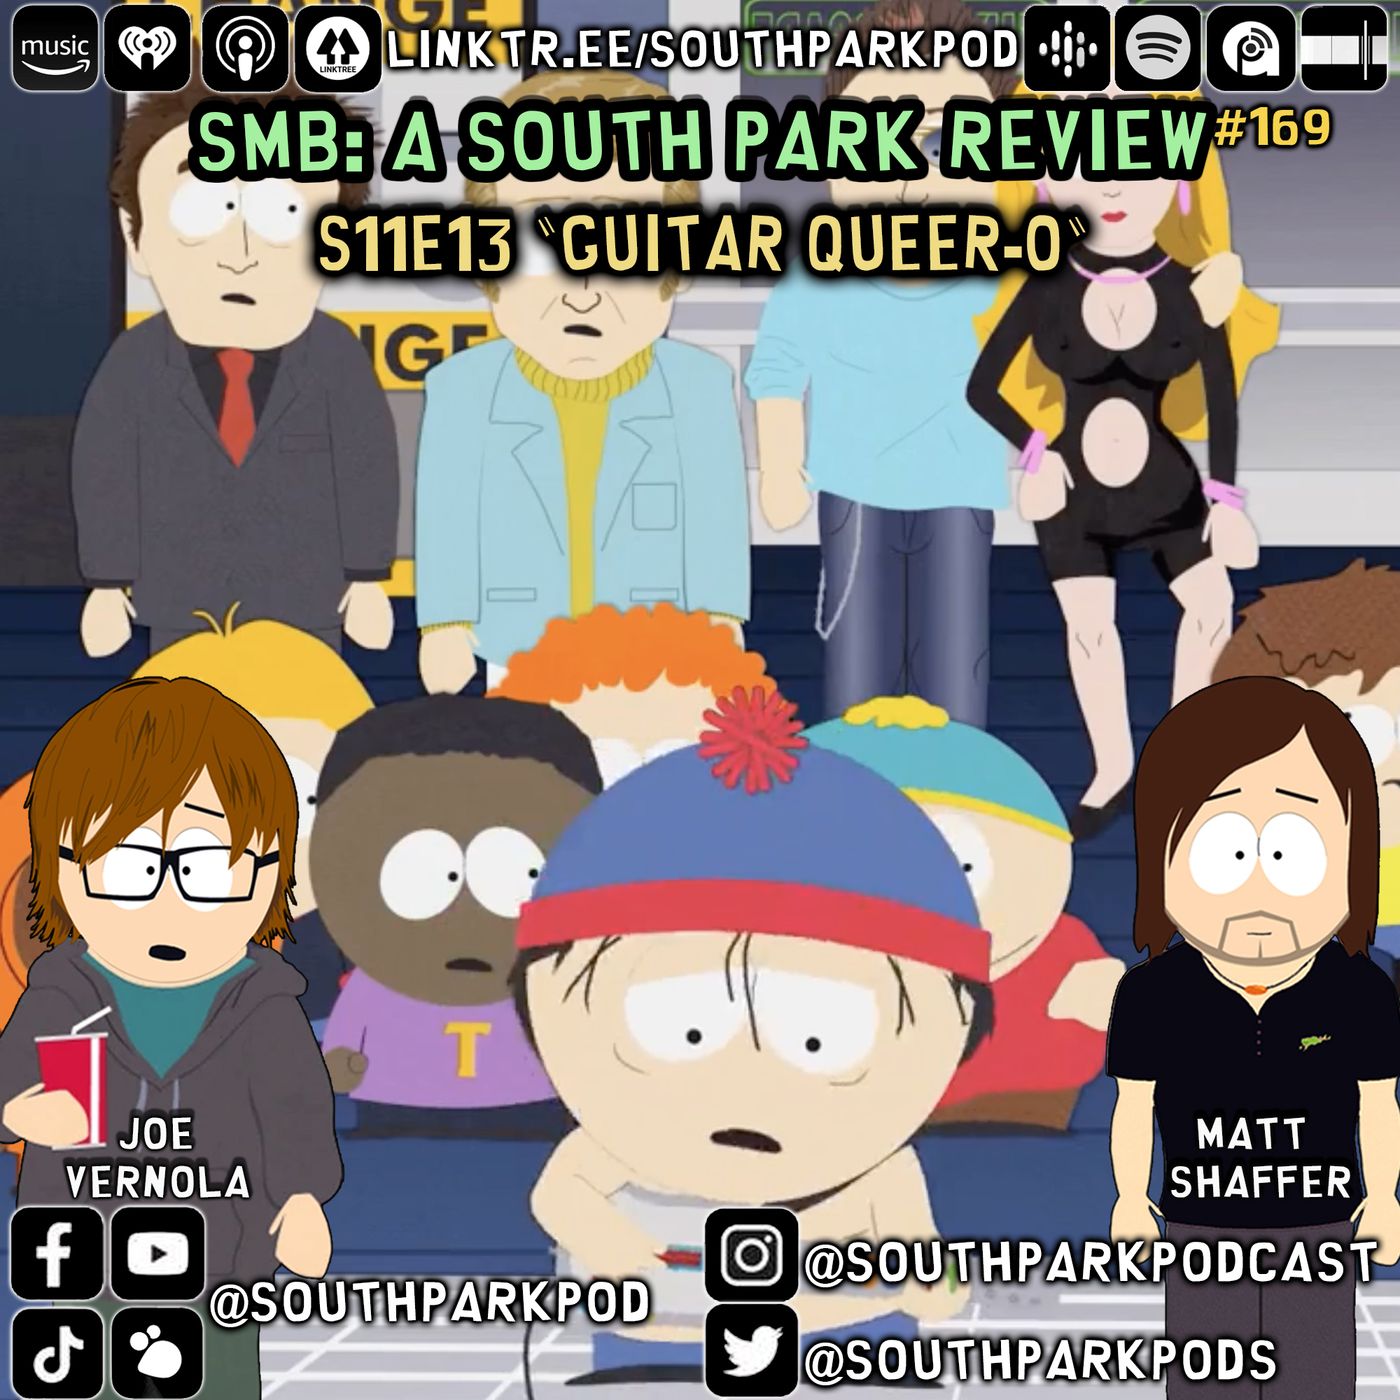 SMB #169 - S11 E13 Guitar Queer-O - ”Dude, This Game Rules!”